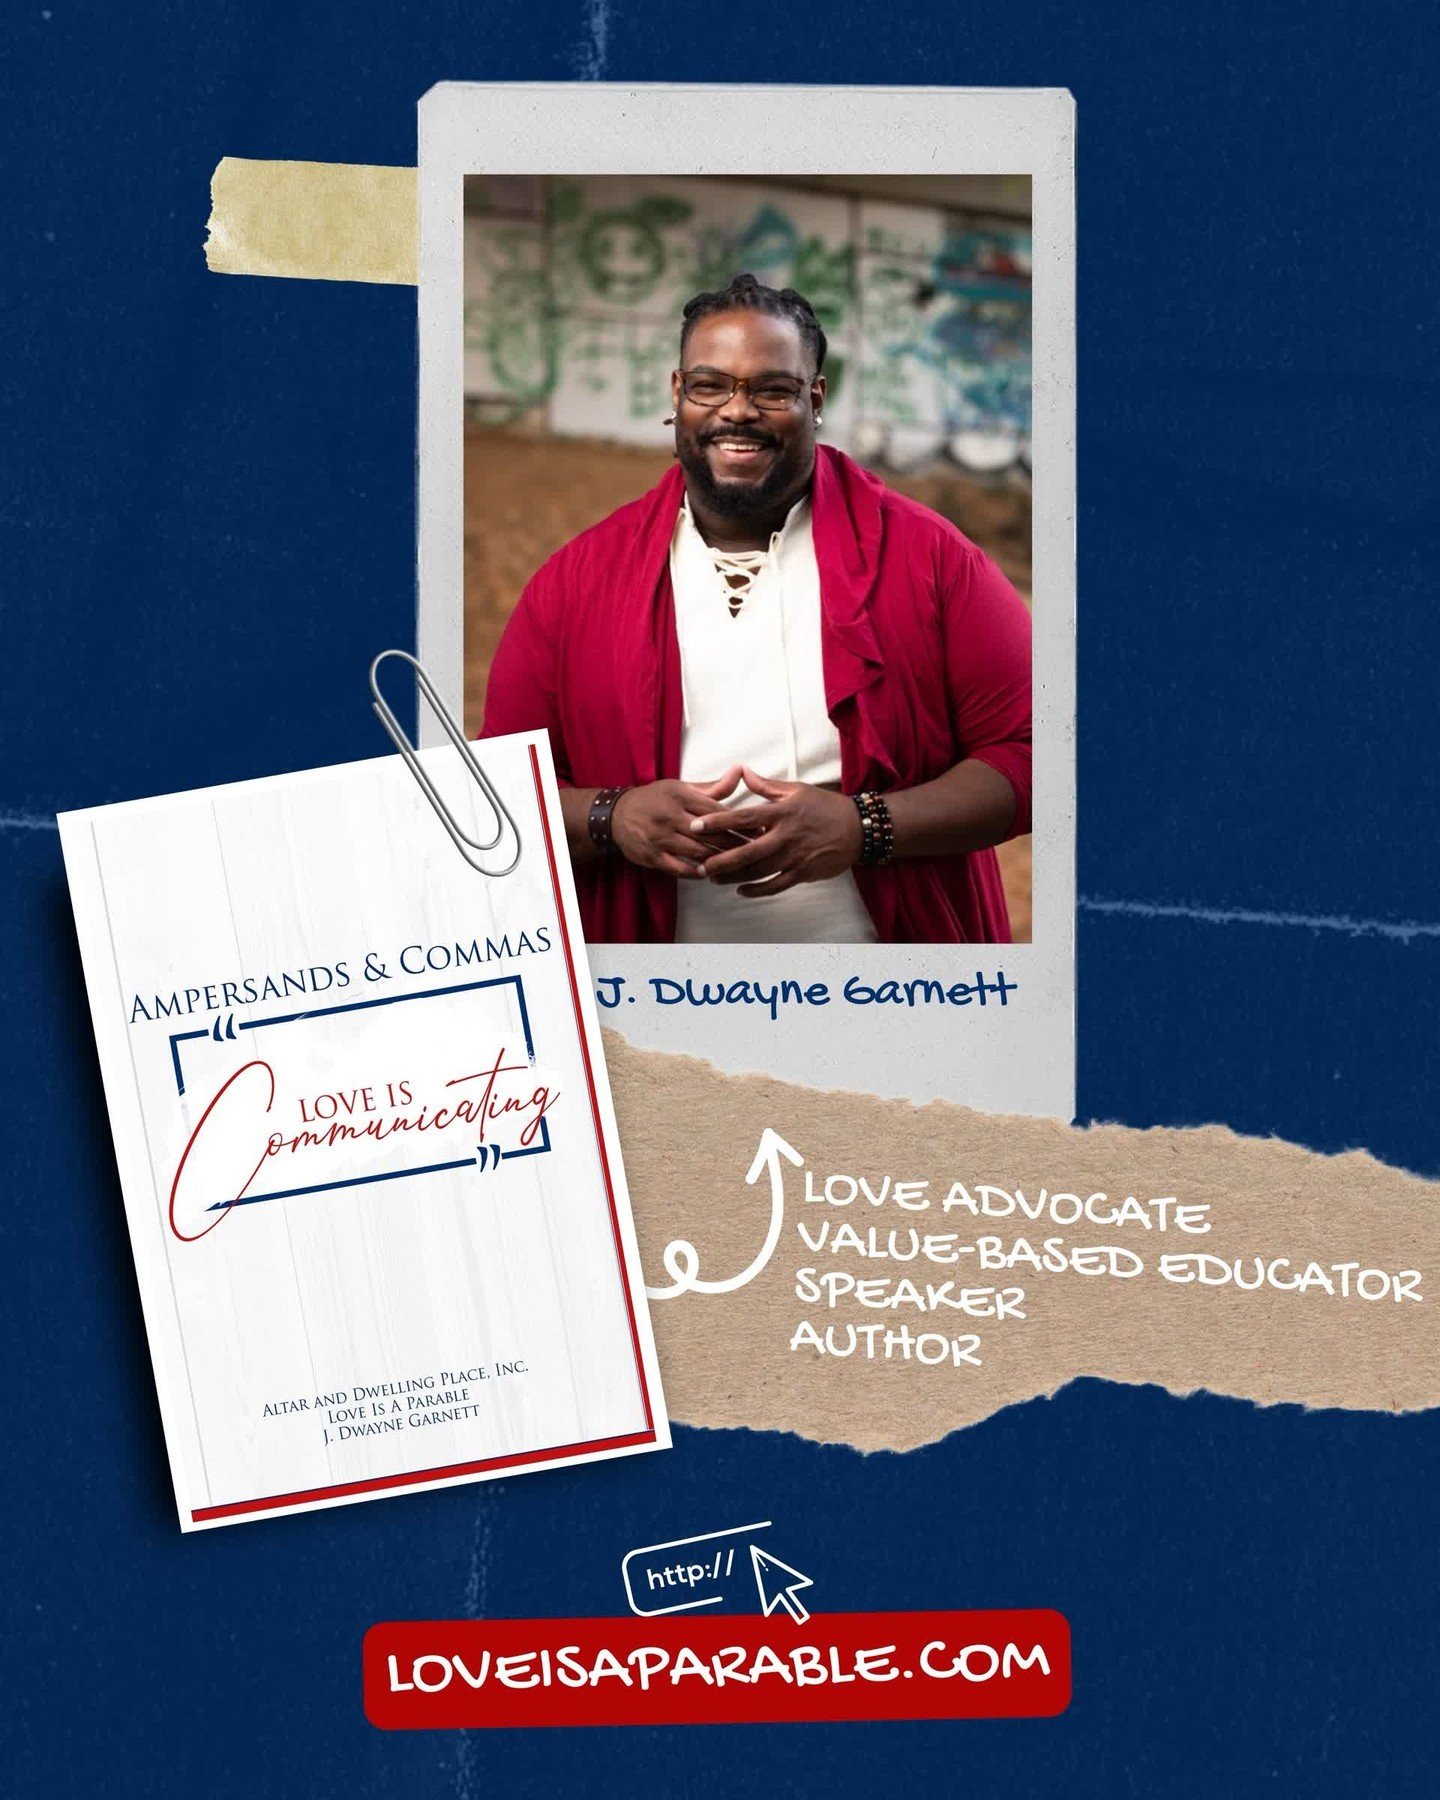 J. Dwayne Garnett is more than a Value-Based Educator, Speaker, and Author&mdash;he&rsquo;s a catalyst for positive outcomes and results. Perfect for individuals, communities, businesses, and towns, his insights and experiences will leave a lasting i